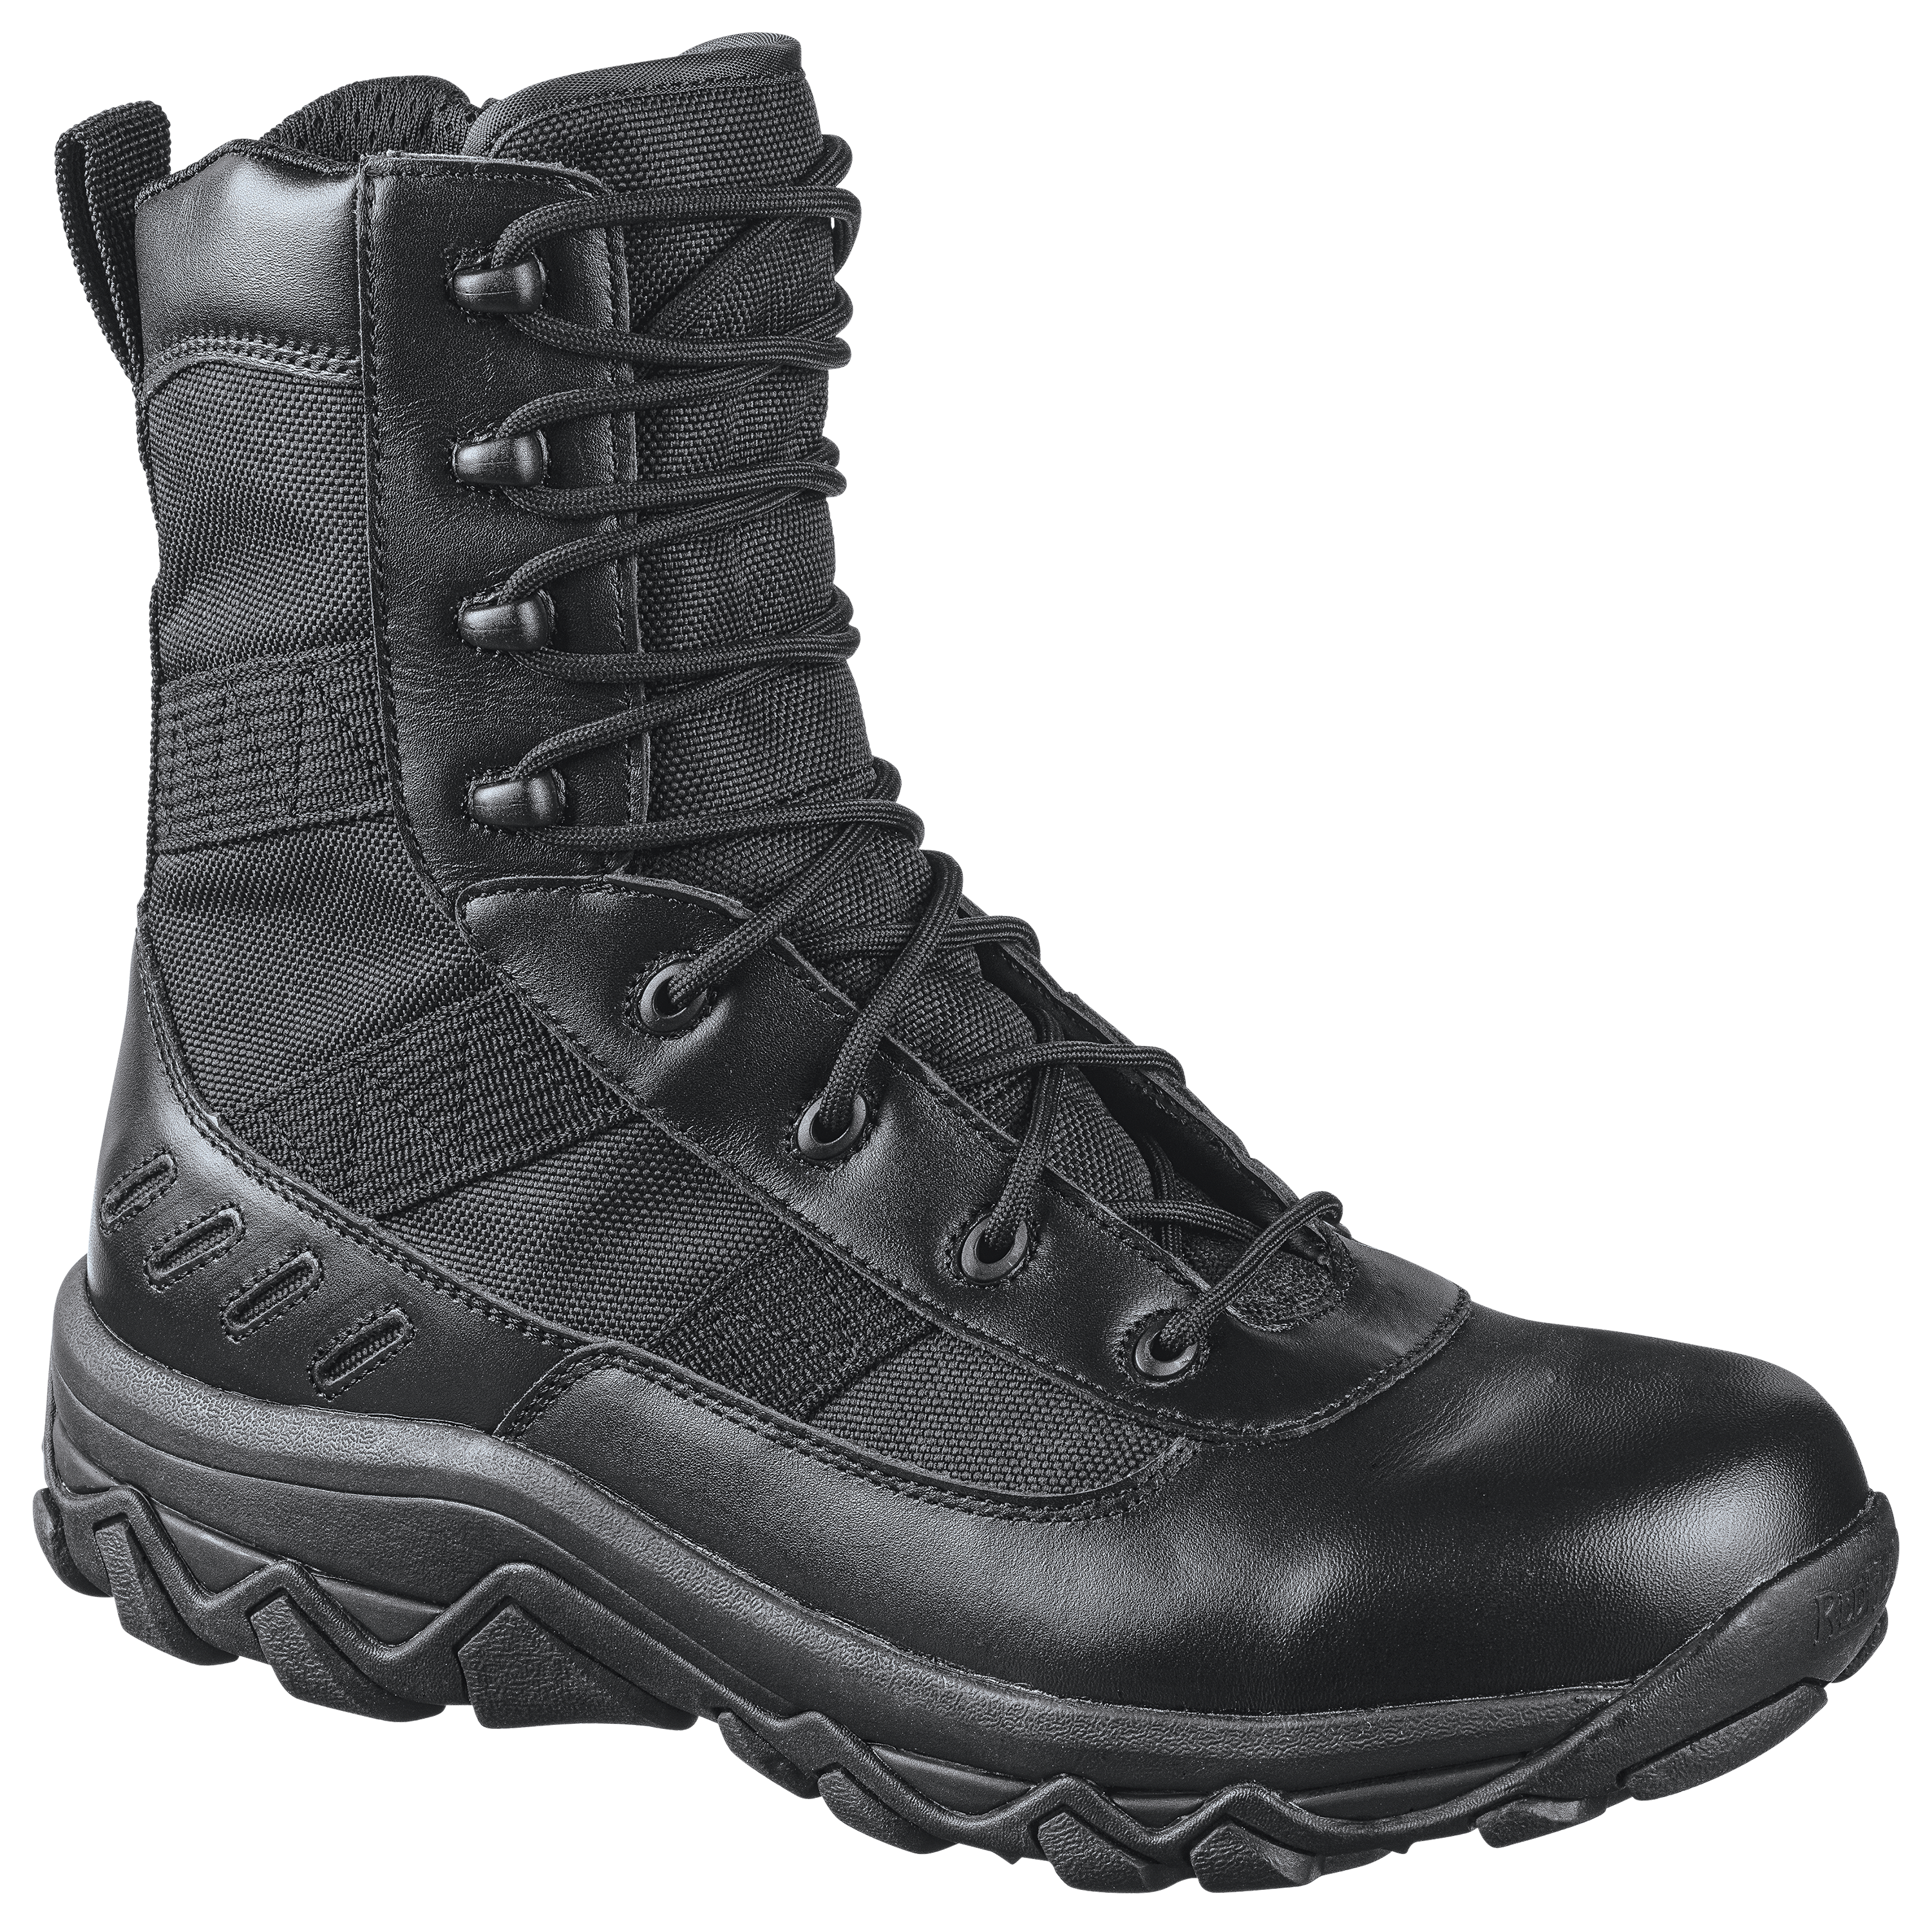 RedHead RCT Warrior Waterproof Side Zip Tactical Duty Boots for Men